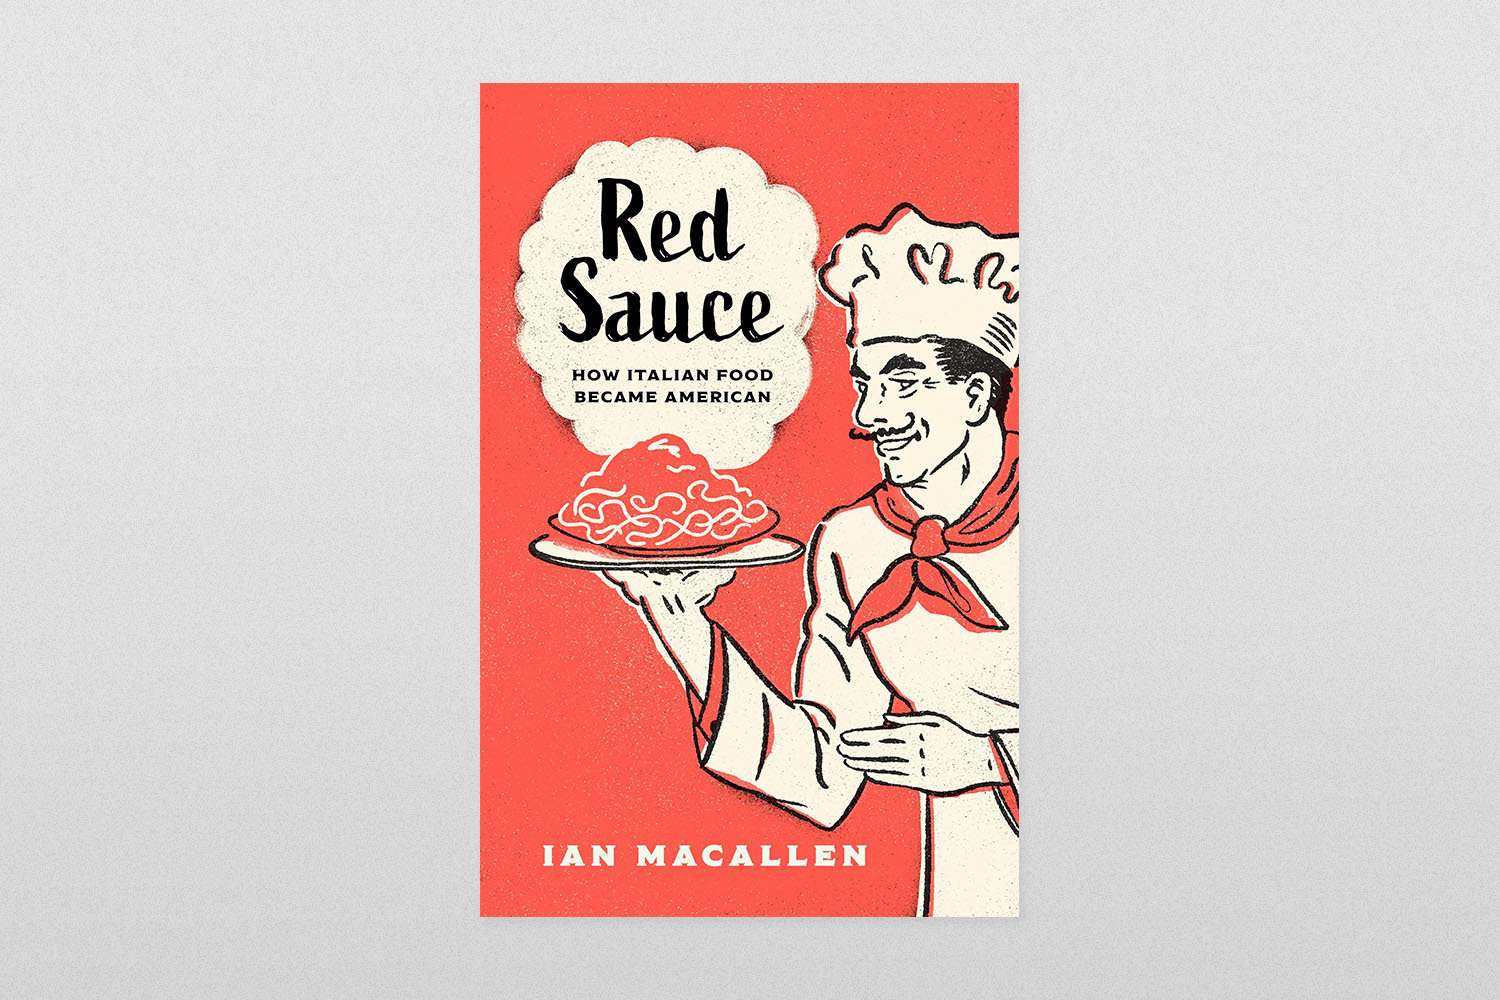 Red Sauce- How Italian Food Became American by Ian MacAllen